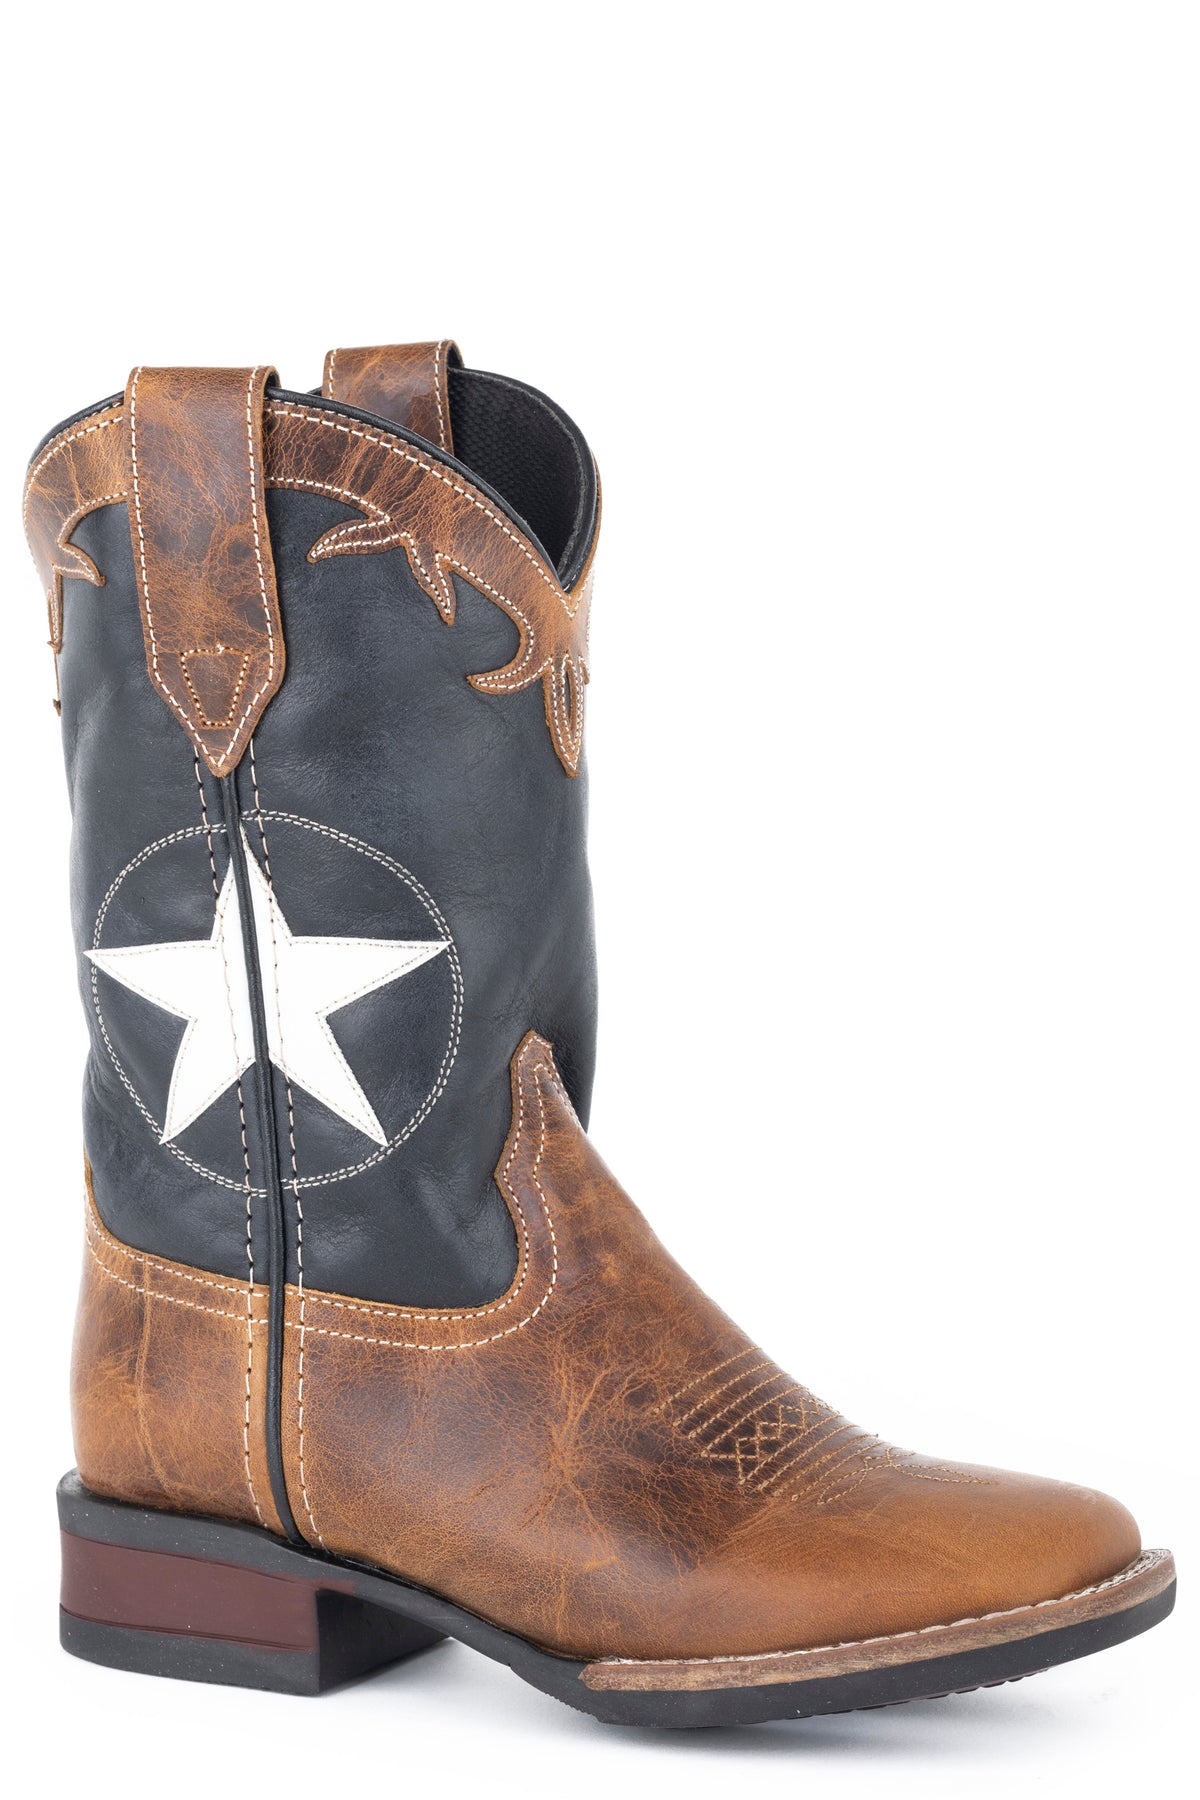 Roper Big Boys Tan Leather Vamp Boot With White Star Overlay On Navy Shaft